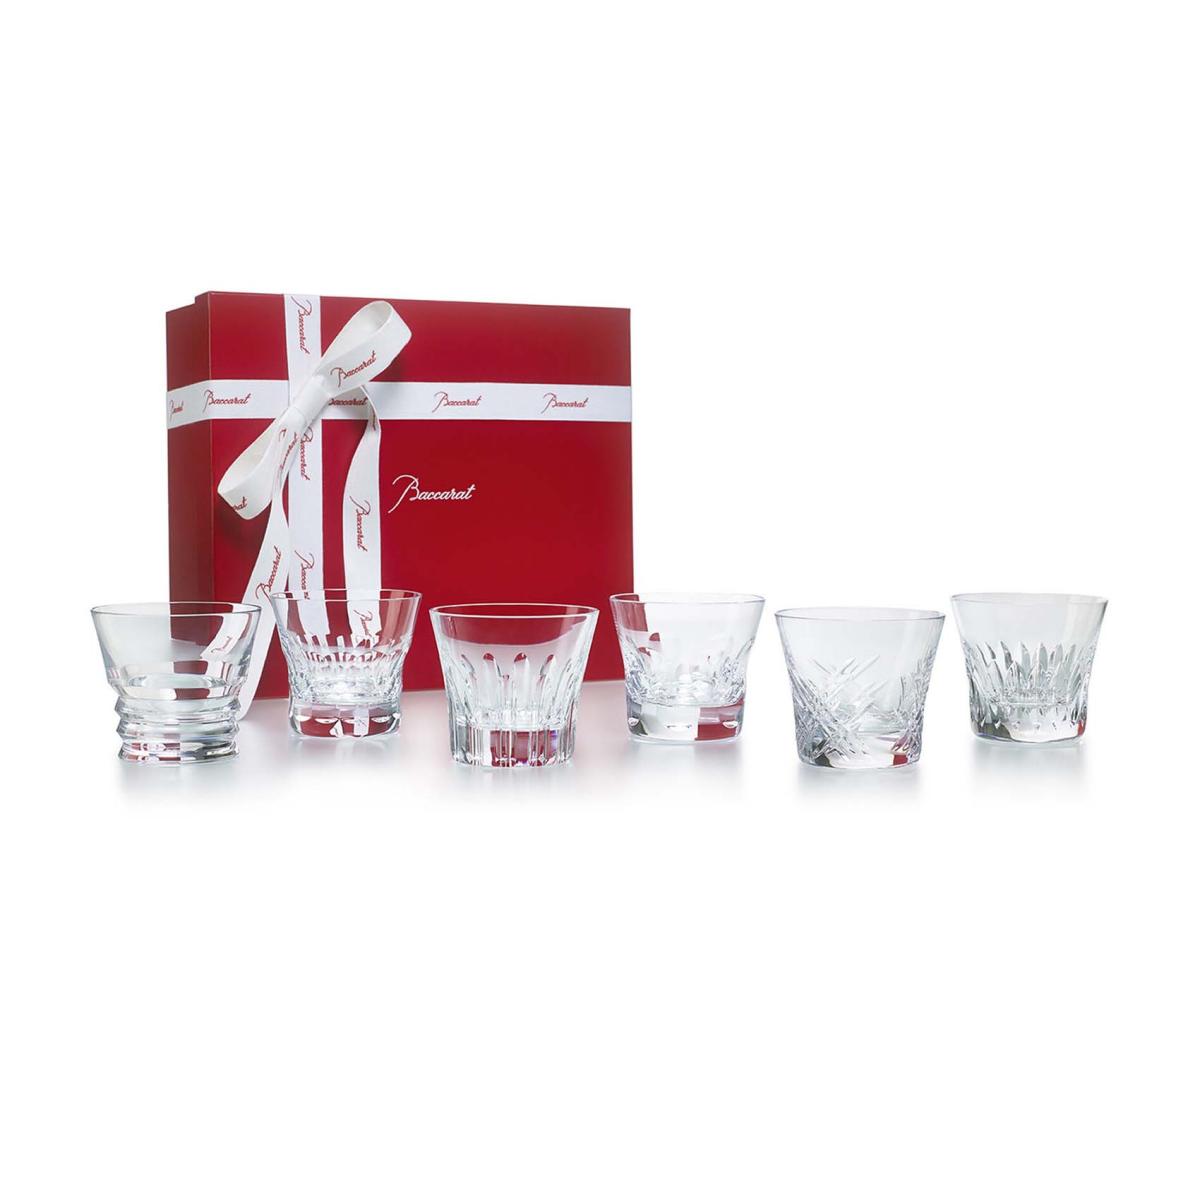 Baccarat Everyday Classic Set of 6 Glasses